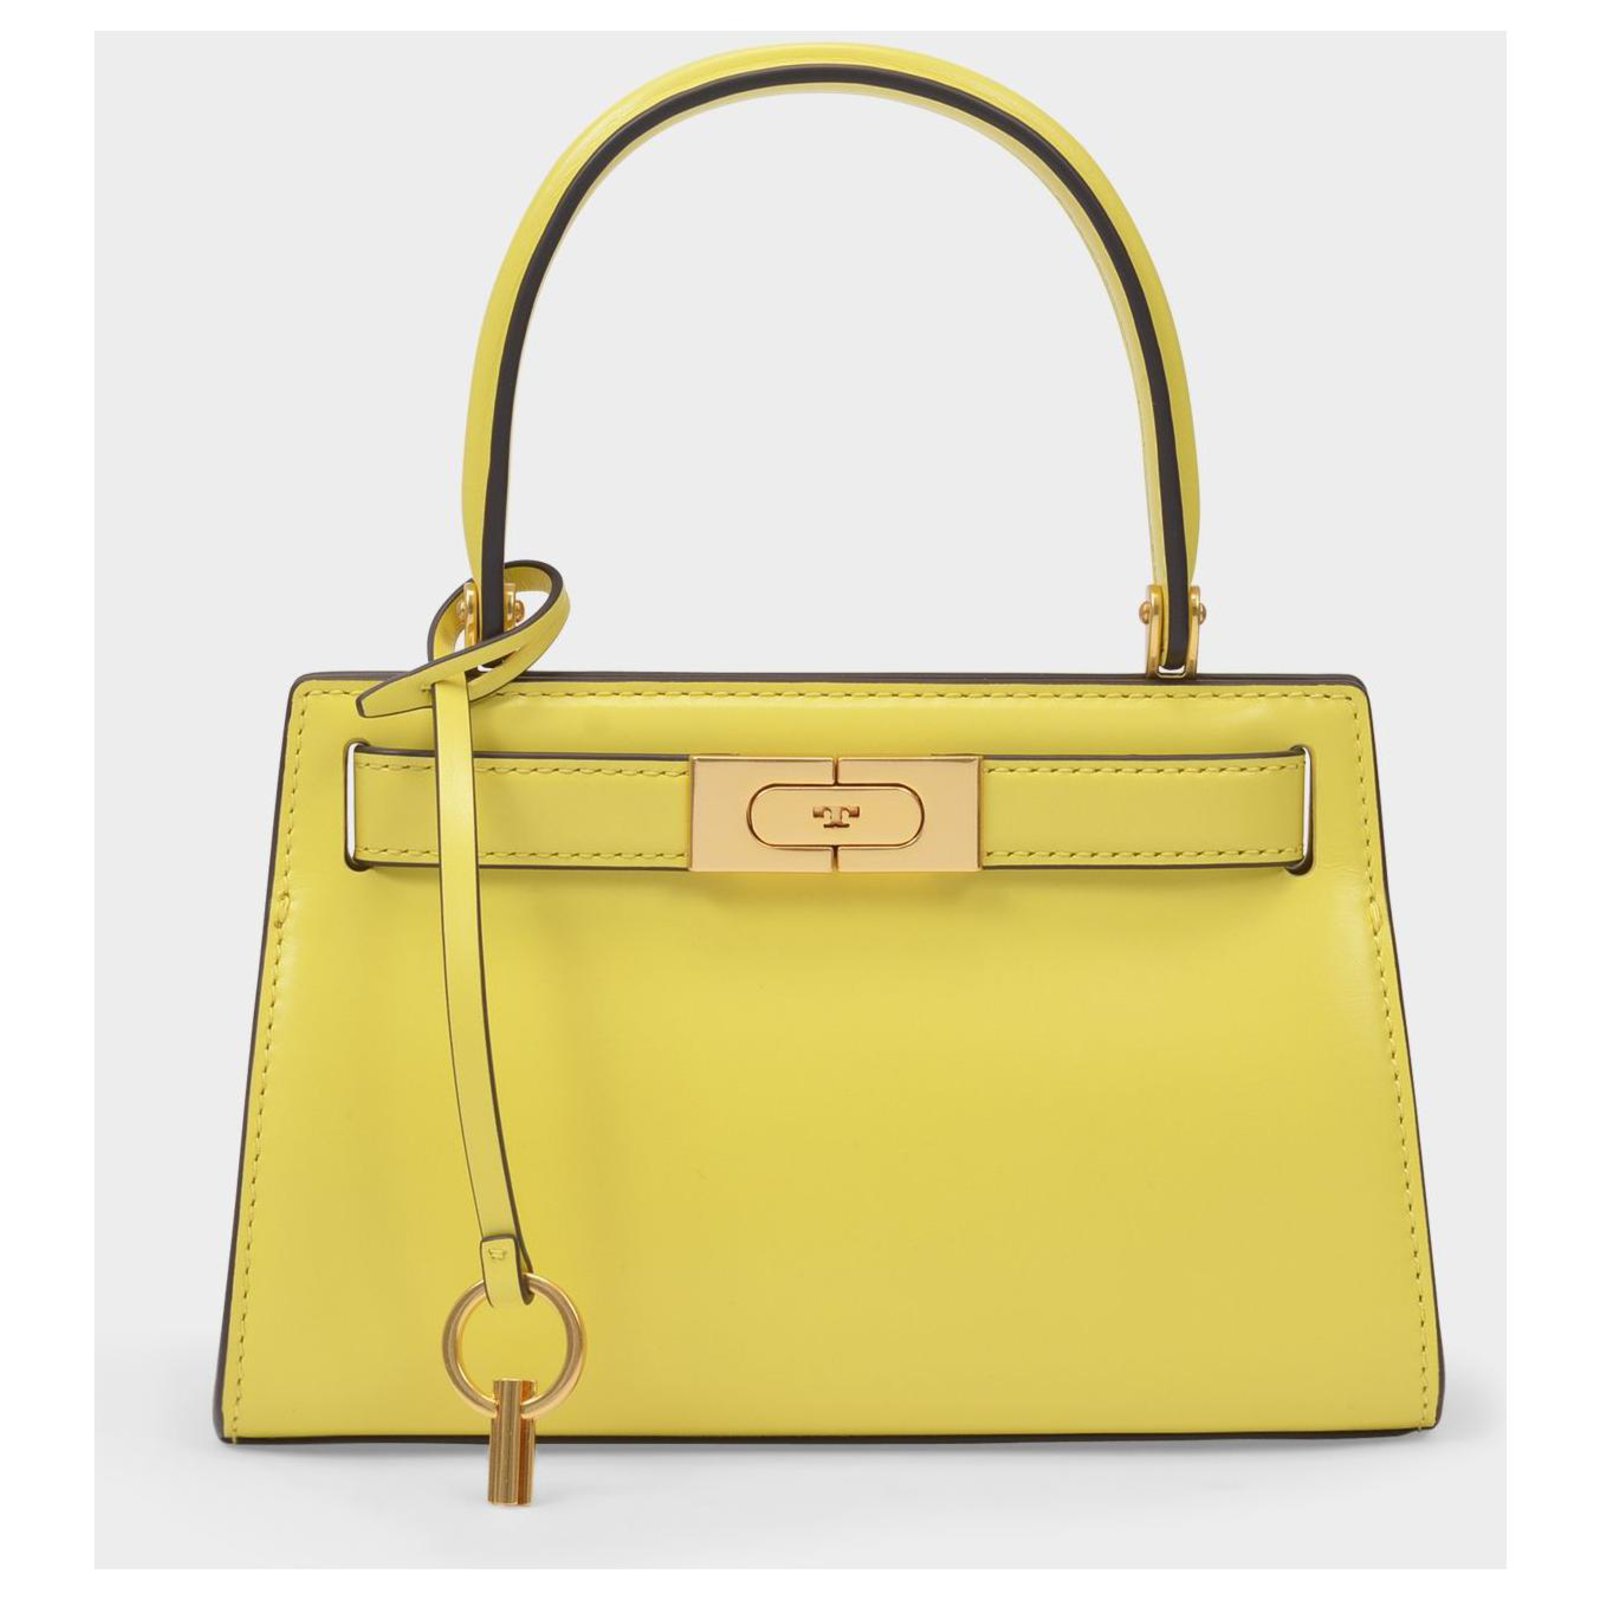 Tory Burch Lee Radziwill Petite Bag in Yellow Leather ref.324933